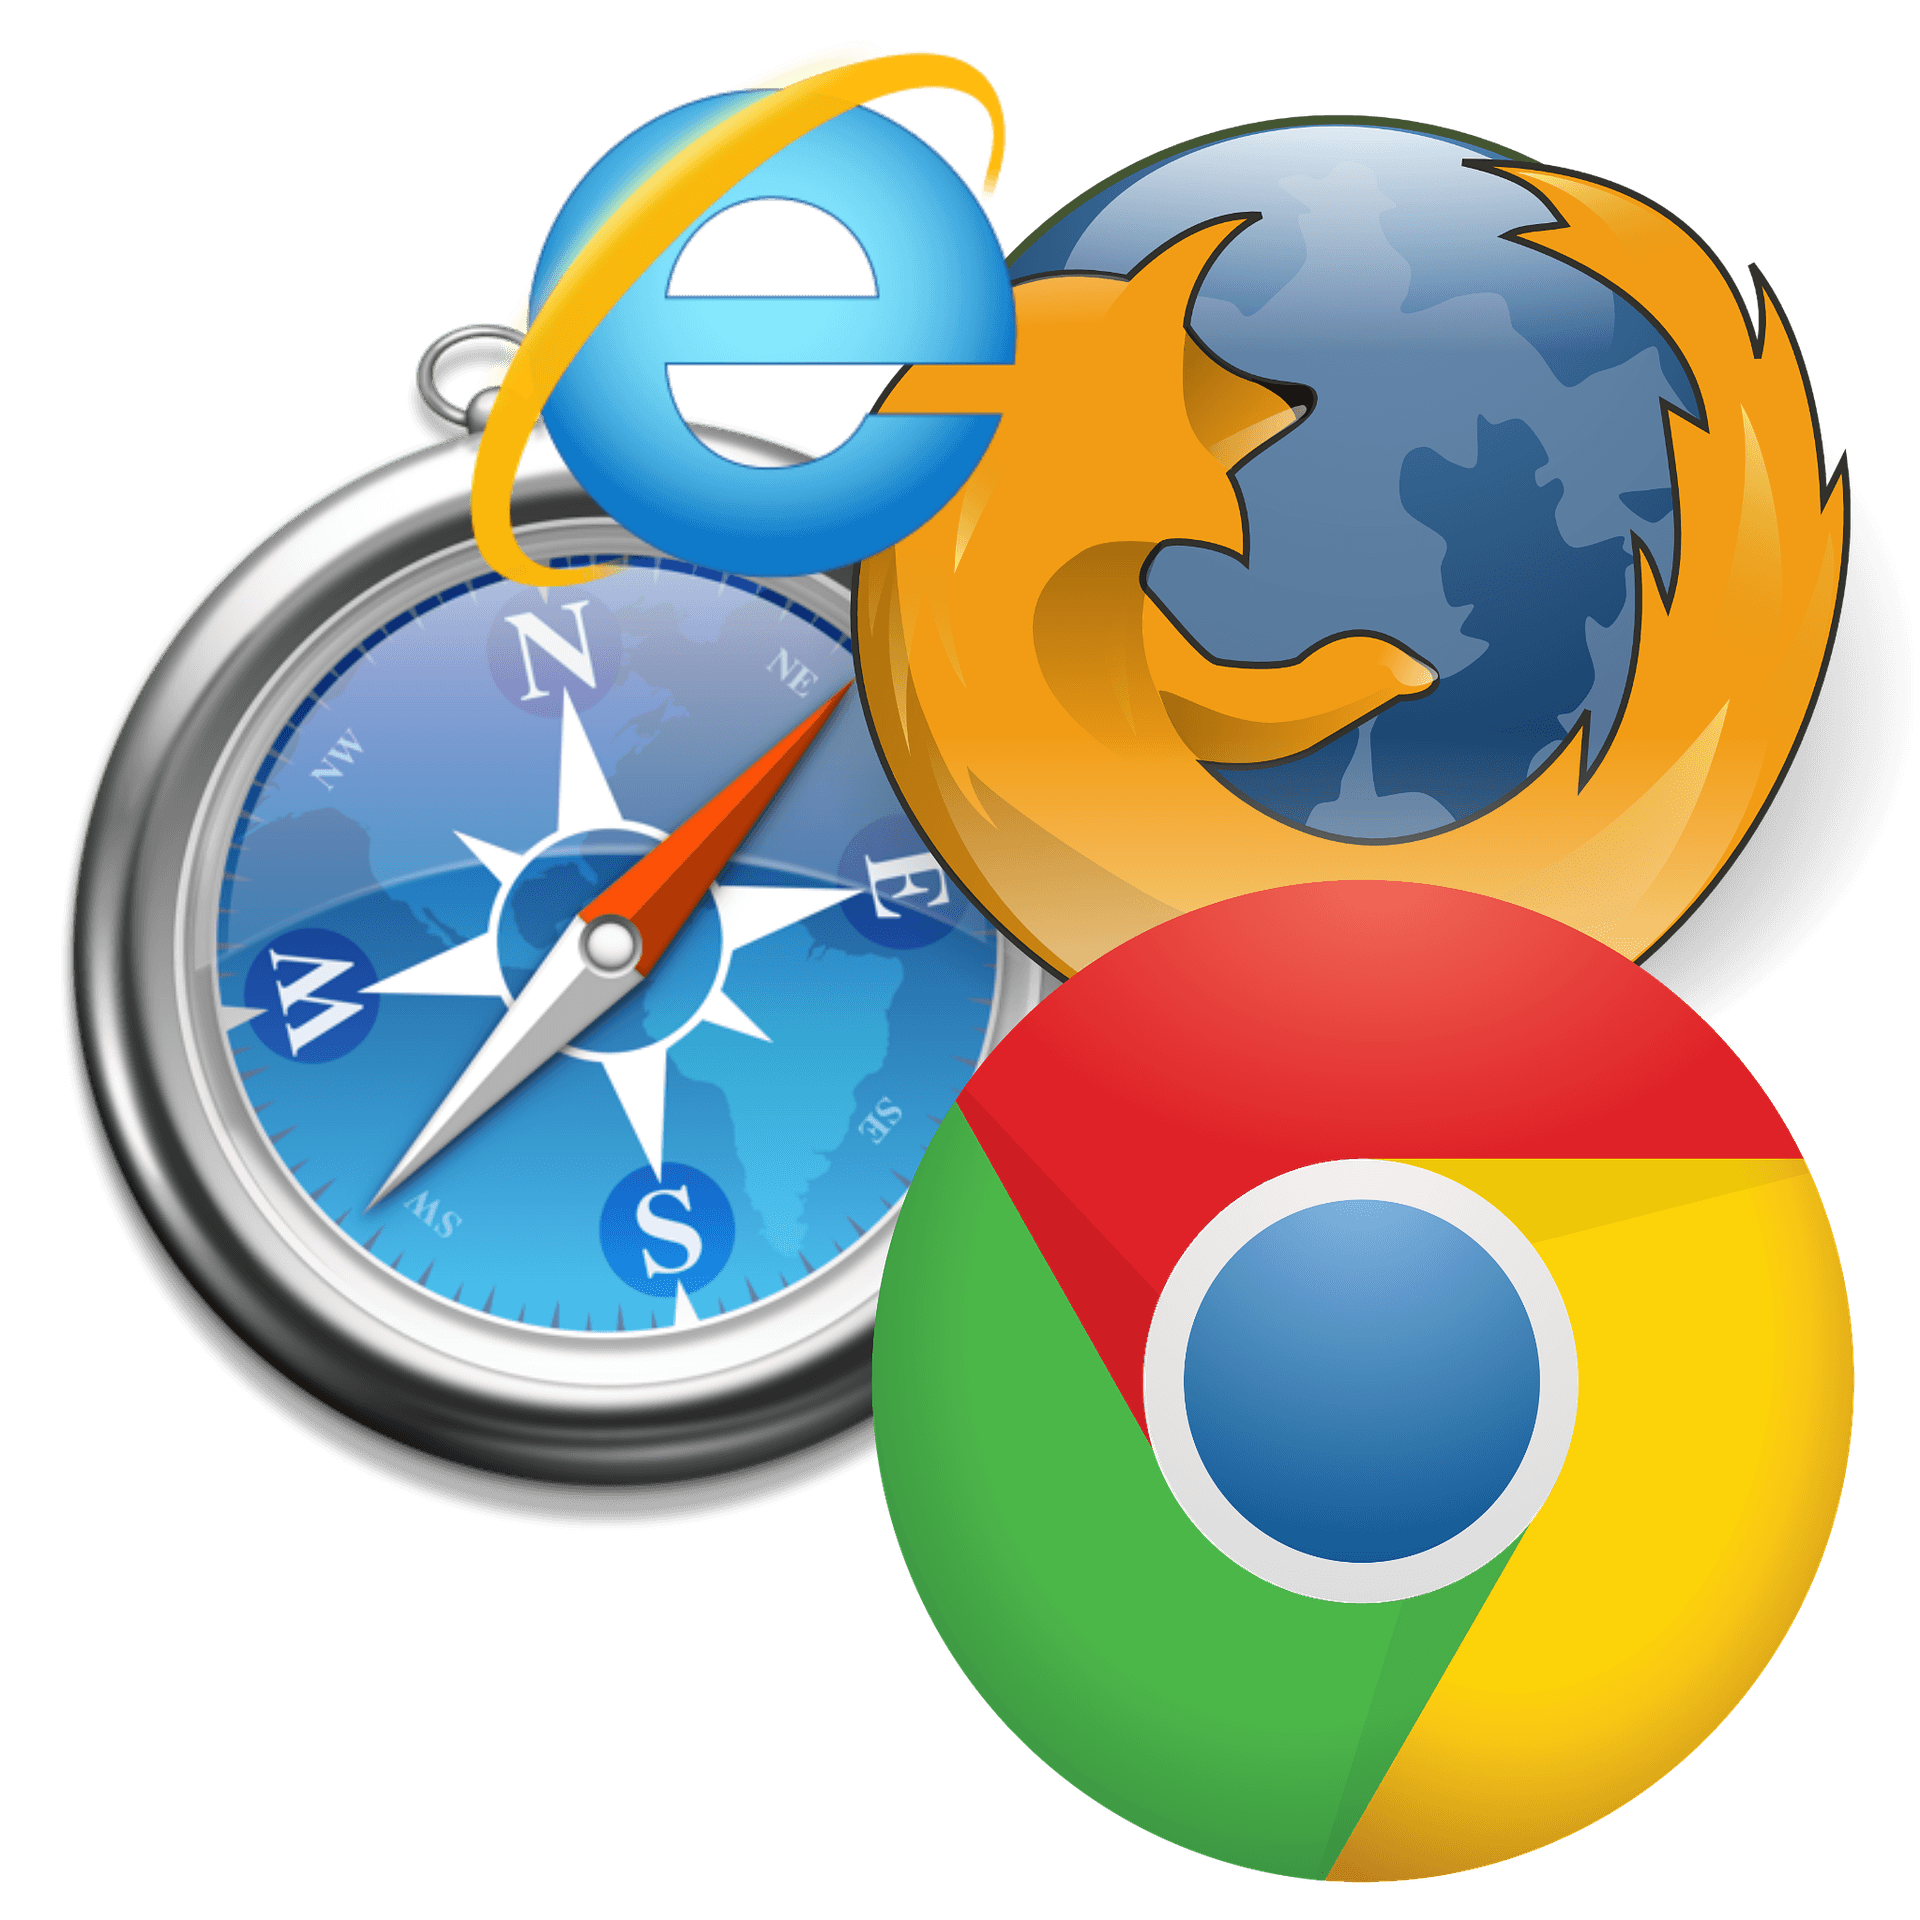 Internet Explorer Old Logo - Florida Courts E-Filing Portal to Stop Support of Old Browsers ...